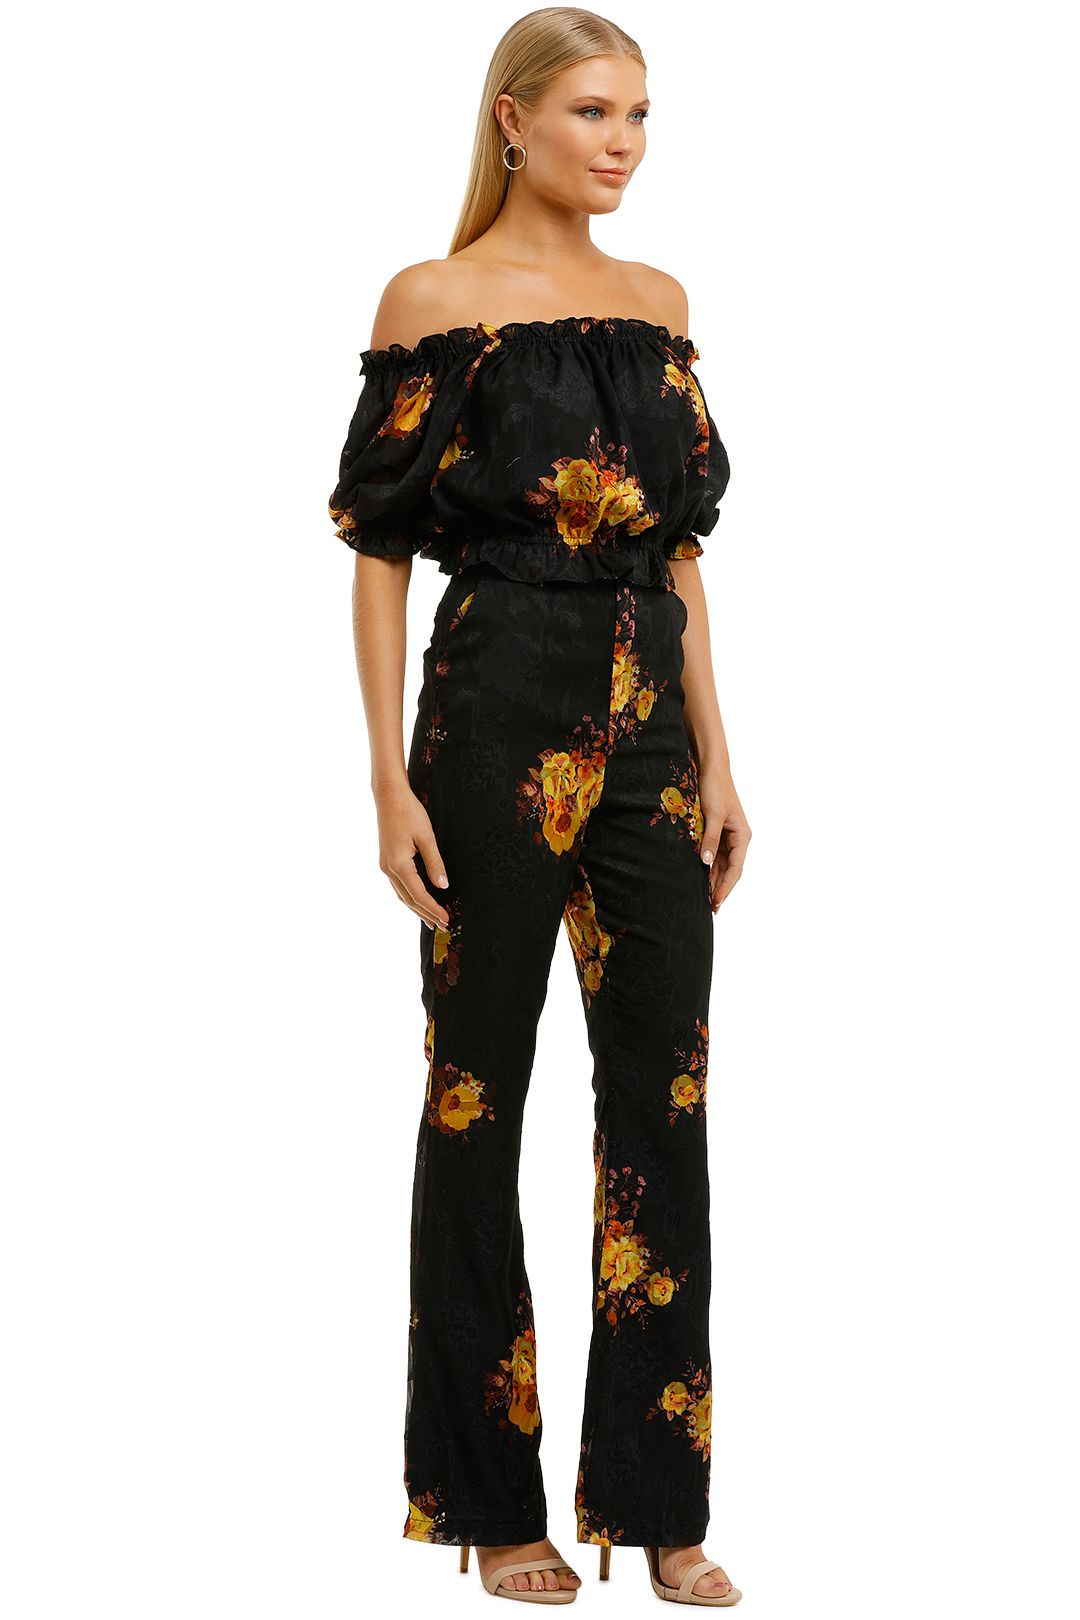 We-Are-Kindred-Ibiza-Top-and-Pant-Set-Noir-Sunflowers-Side